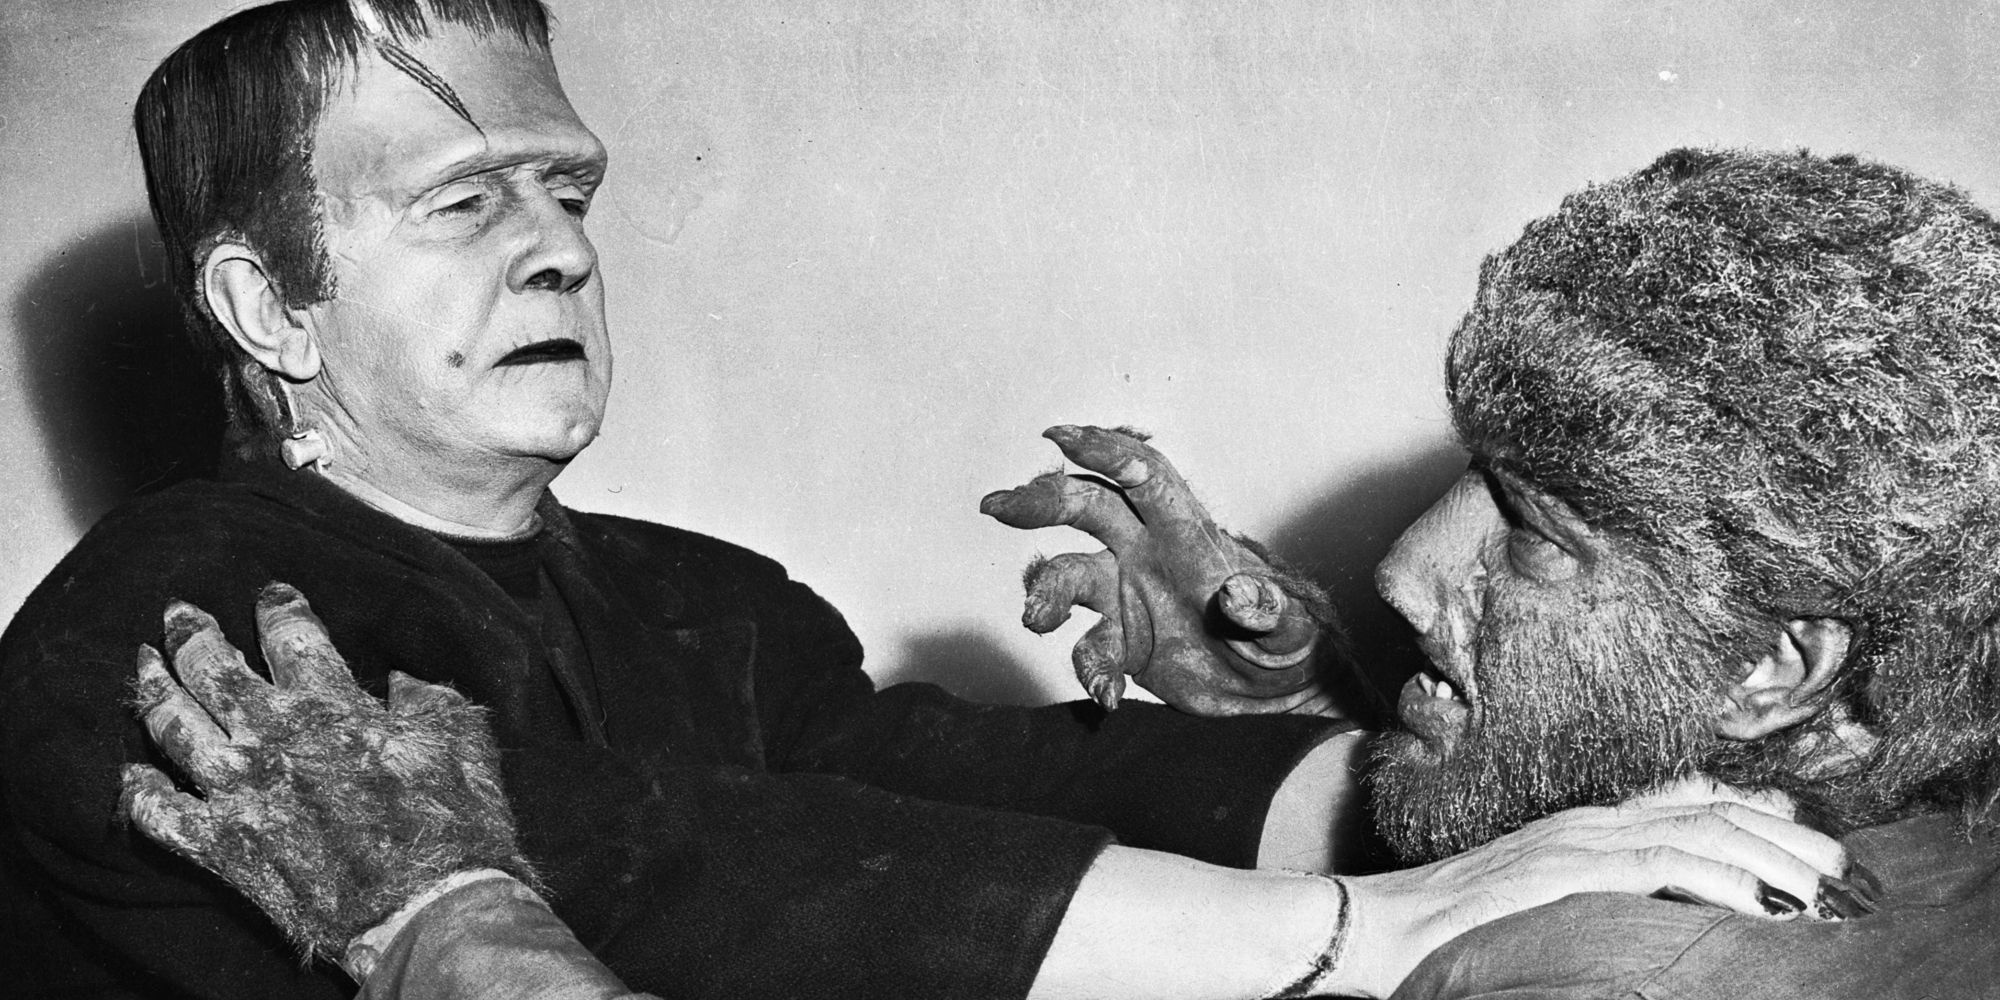 10 Interesting Behind The Scenes Facts About The Universal Monster Movies